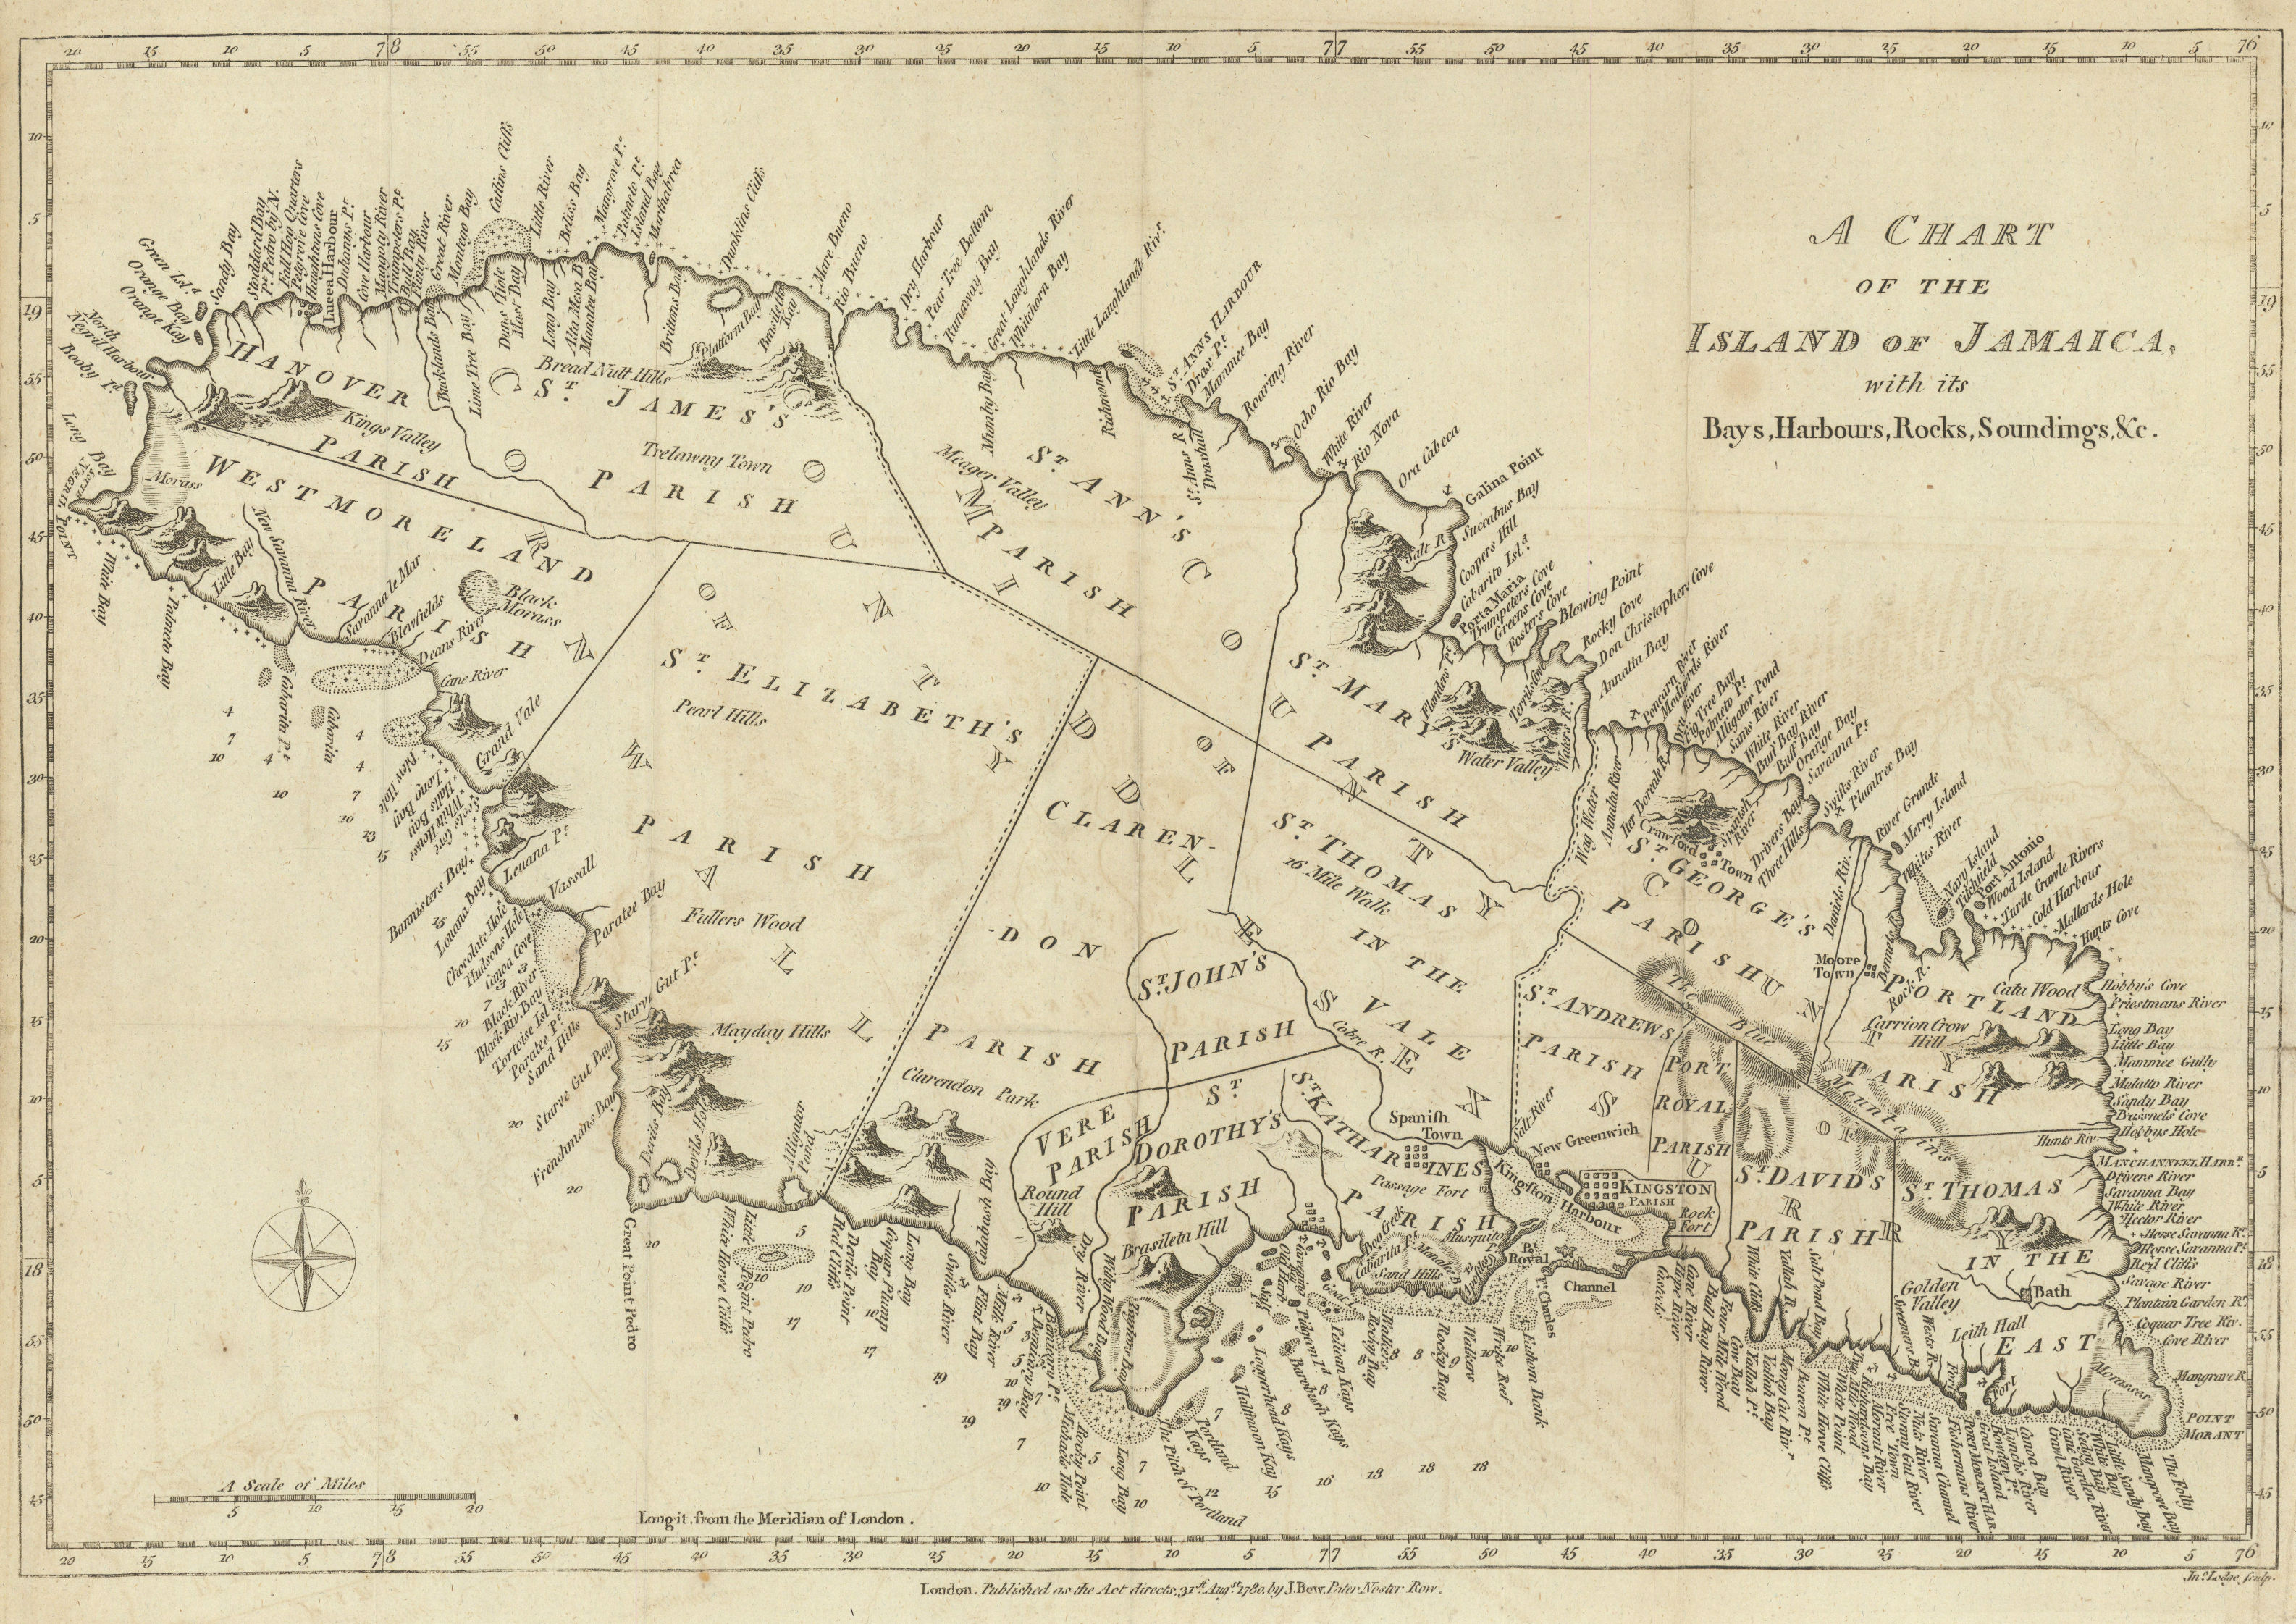 A Chart of the Island of Jamaica with its Bays, Harbours… by John Lodge 1780 map